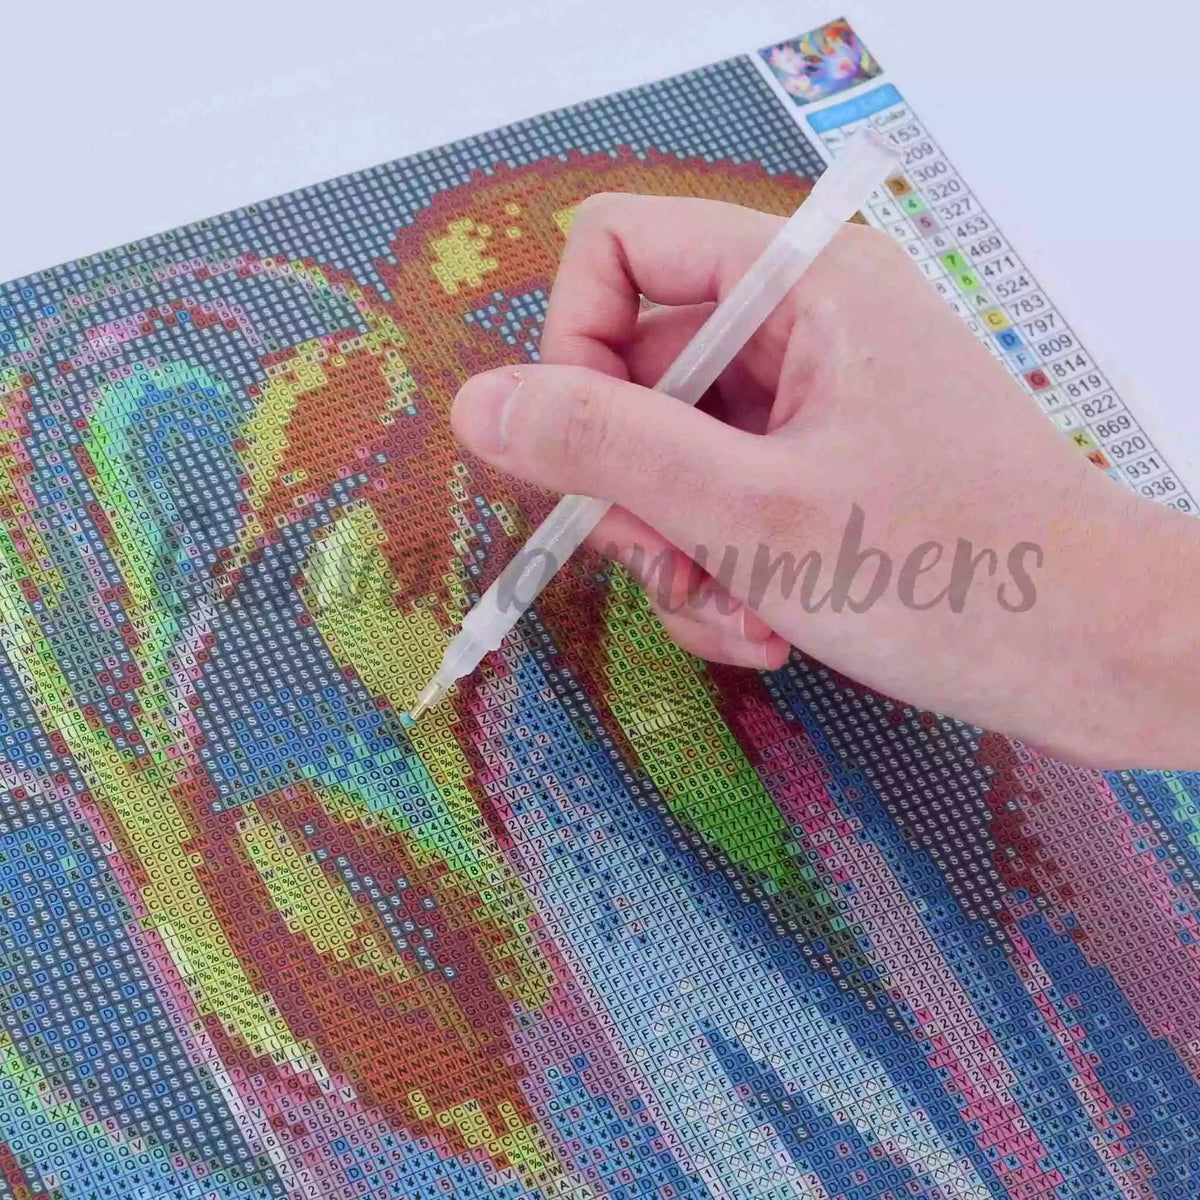 The River - Diamond Painting Kit-Diamond Painting-16"x20" (40x50cm)-Canvas by Numbers US